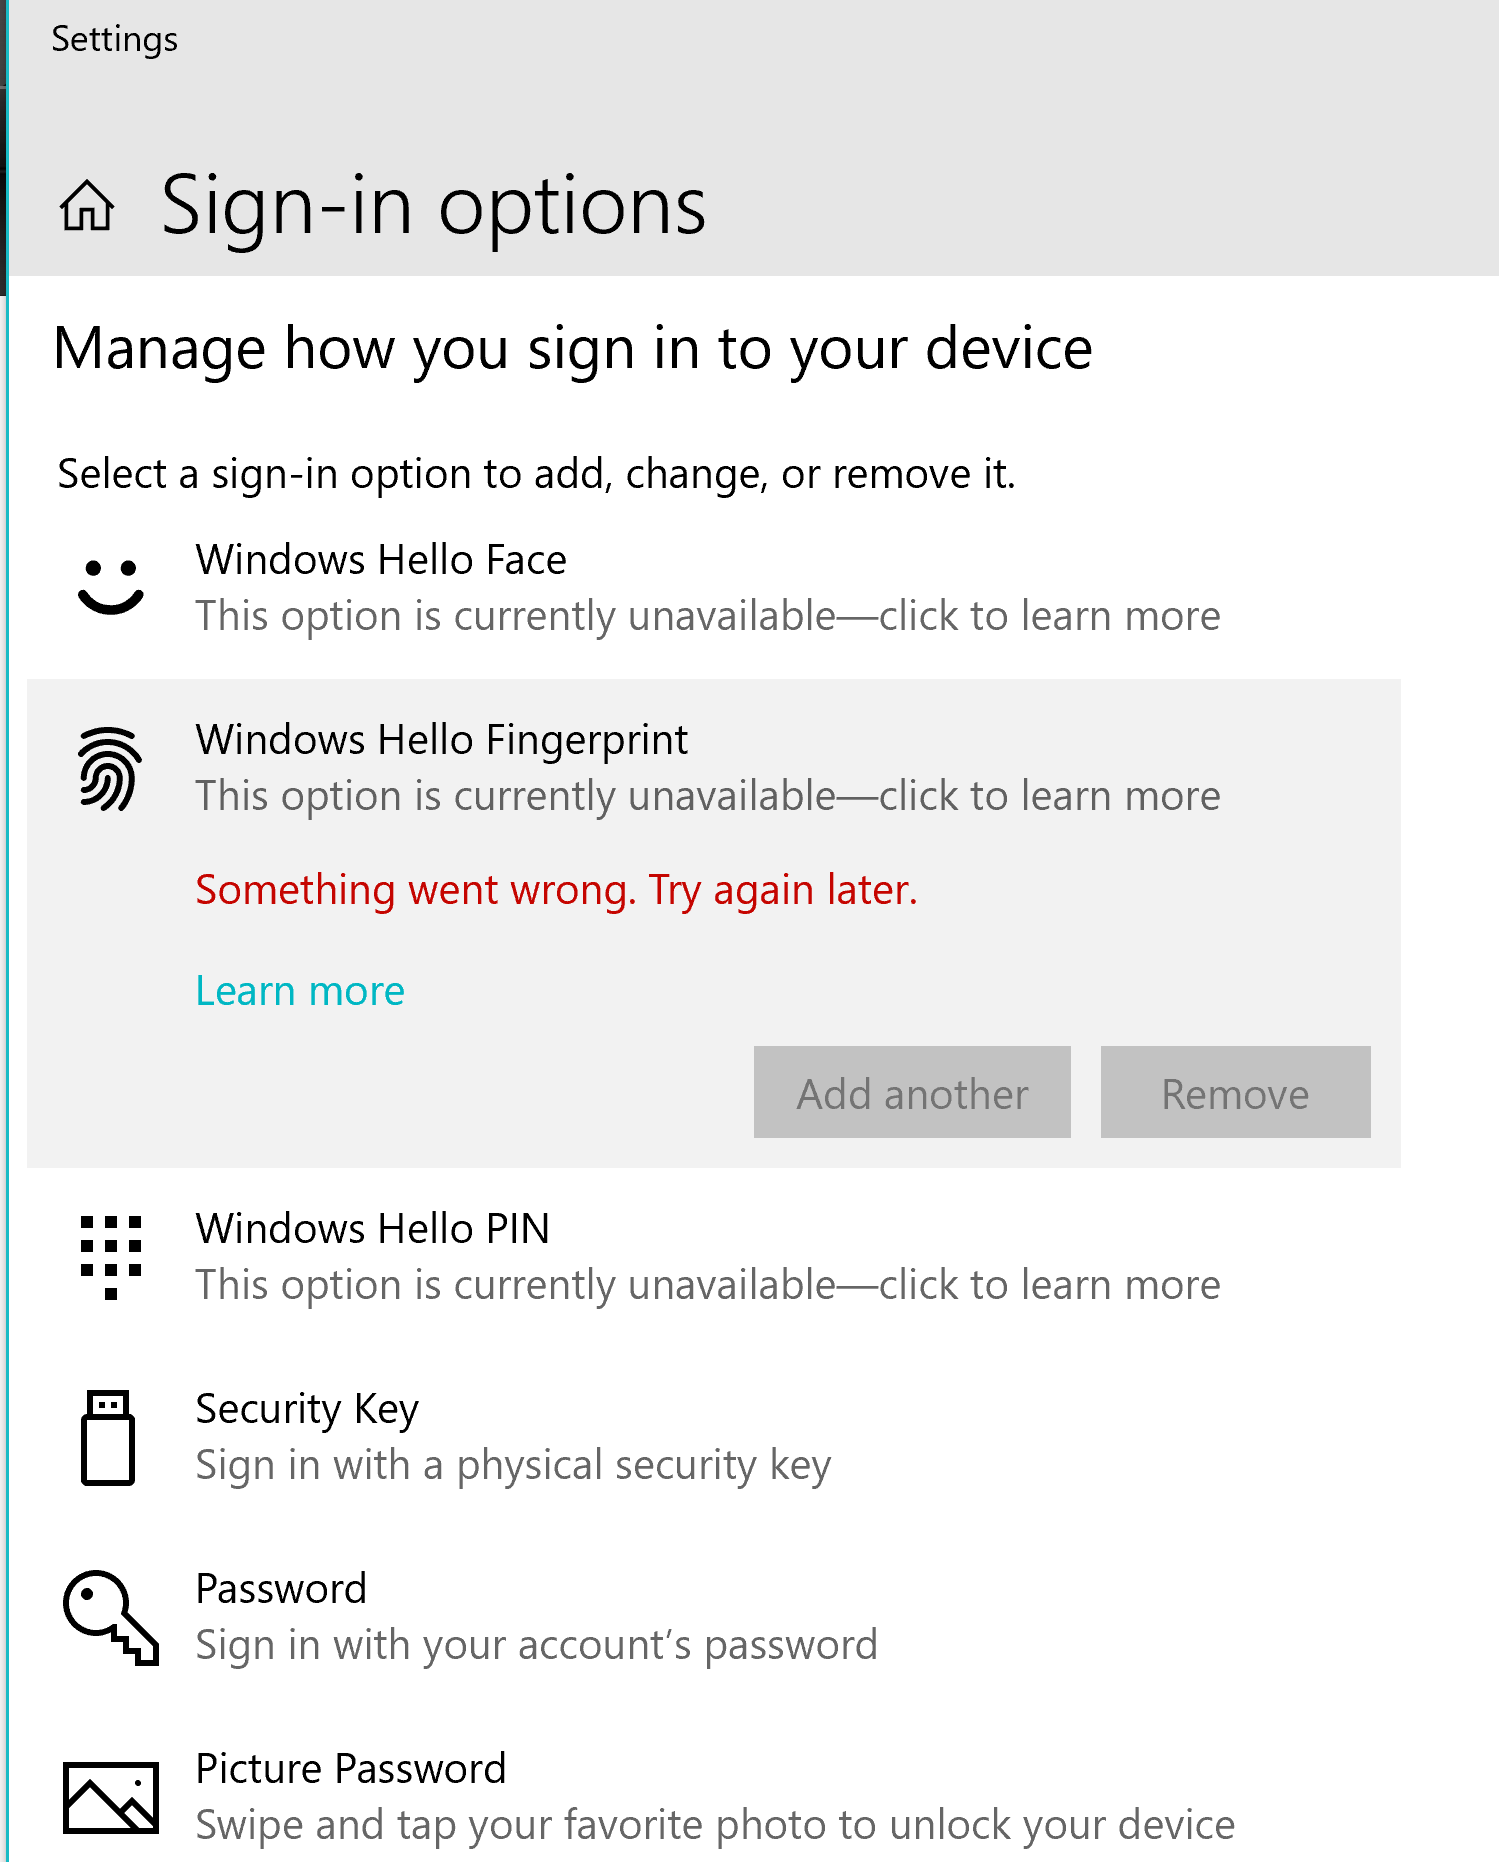 Windows Hello "This option is currently unavailable-click to learn more" problem ca35db02-ceb5-4208-946c-7e9827d35519?upload=true.png